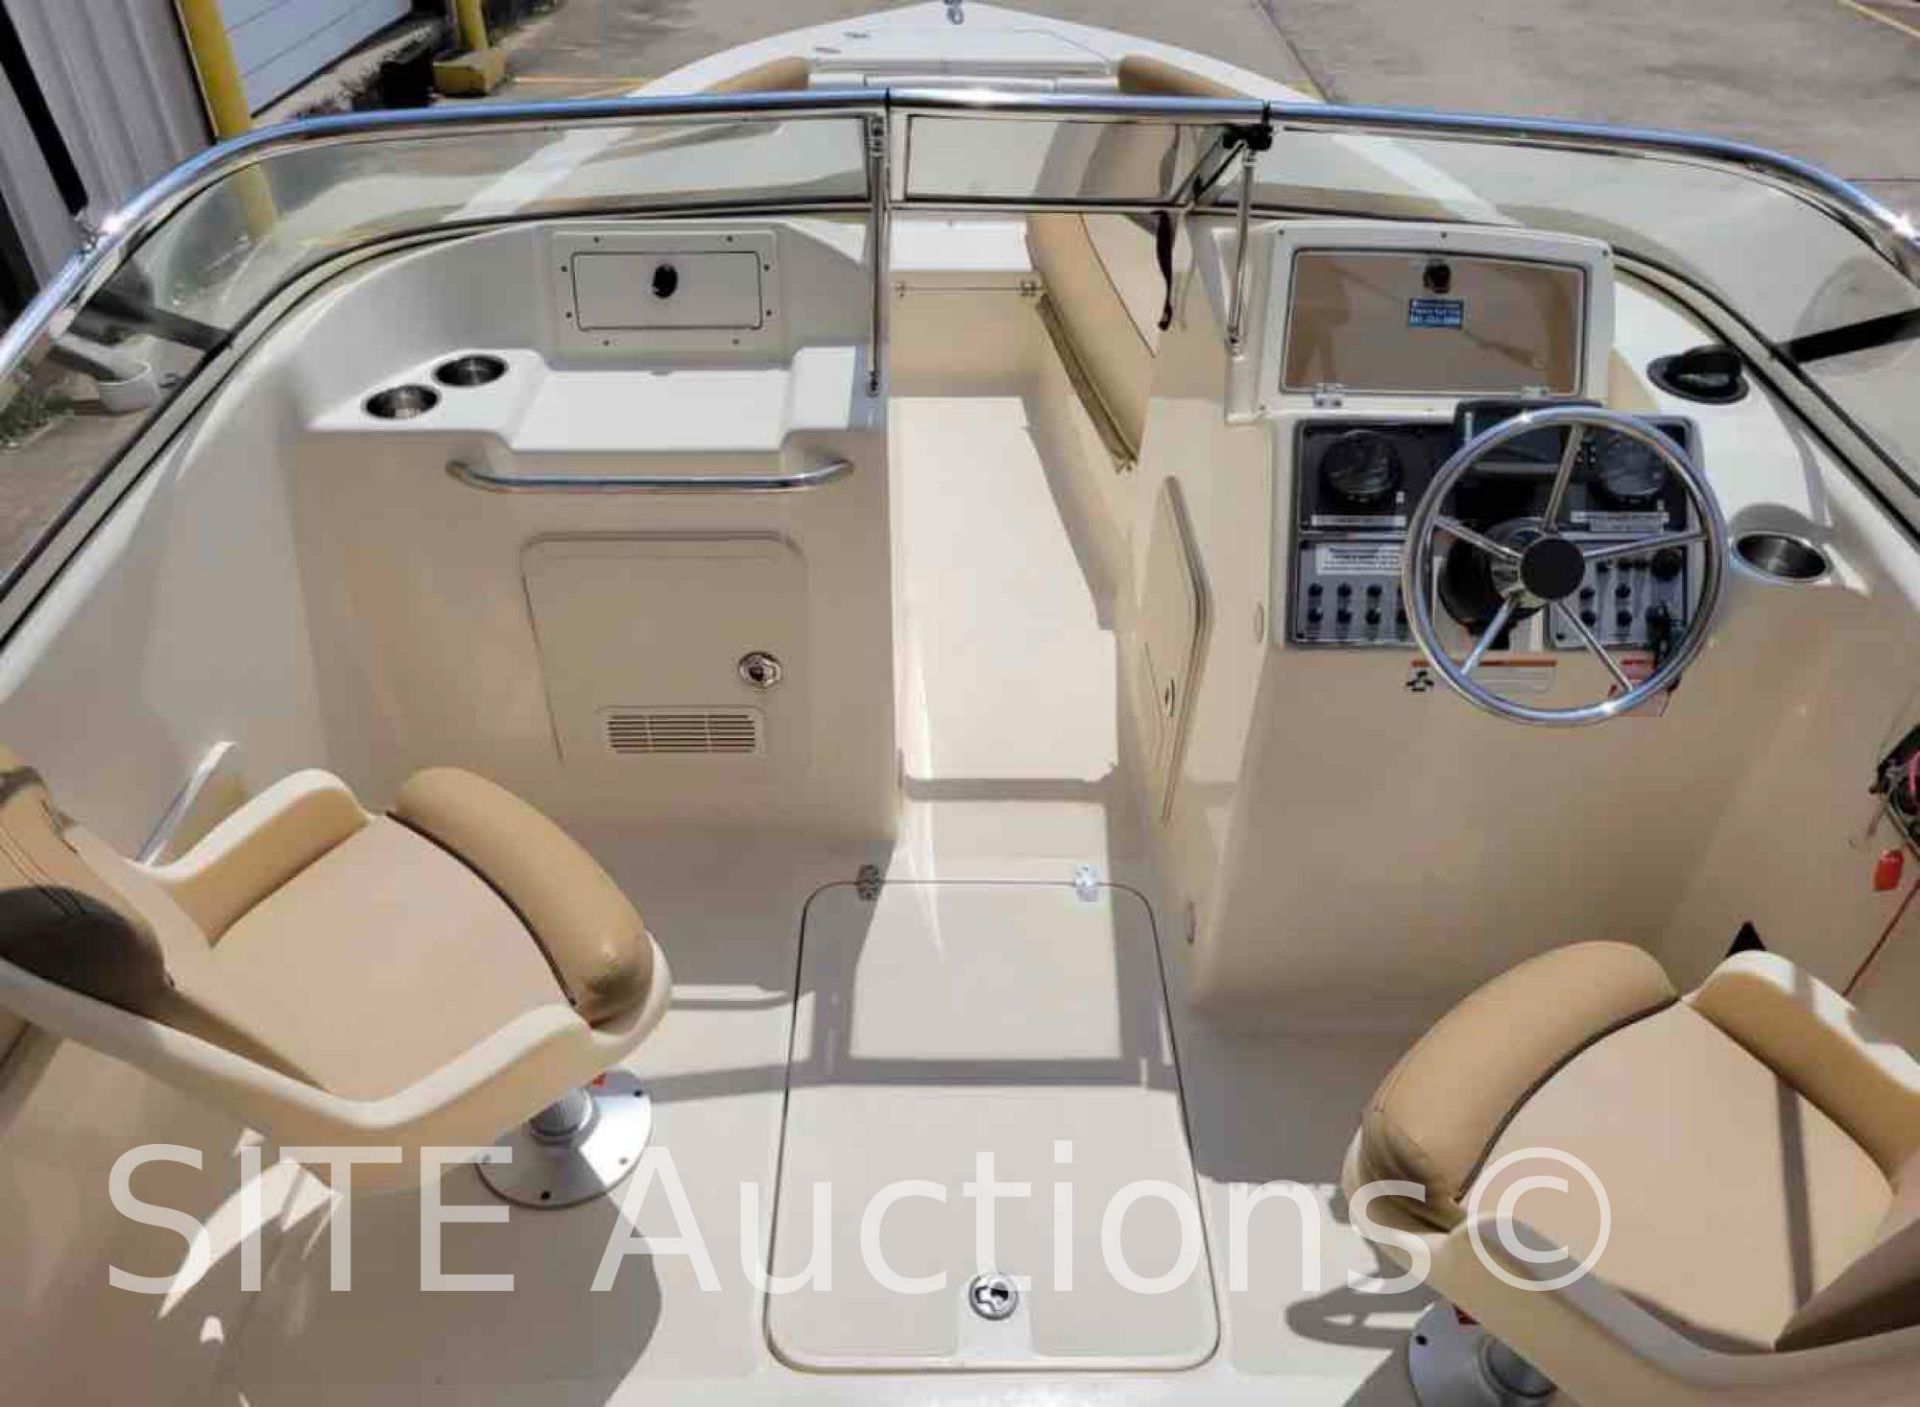 2020 Scout Dorado 20ft. Boat with Trailer - Image 8 of 21